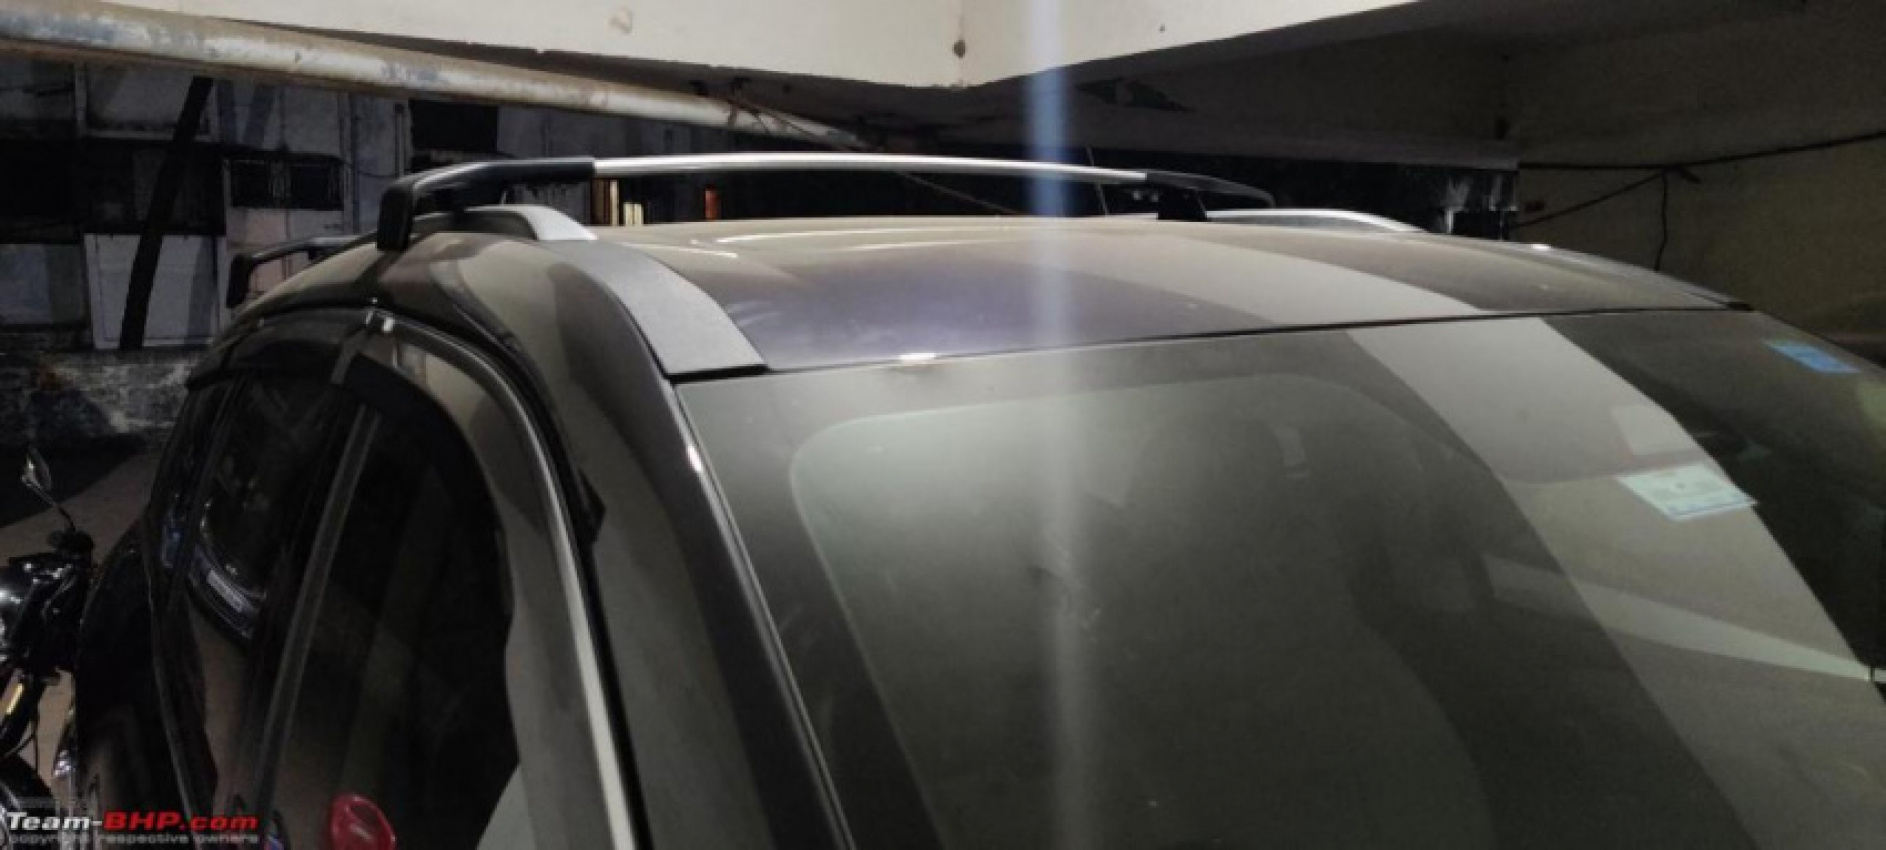 autos, cars, mahindra, accessories, accessories & aftermarket parts, indian, mahindra xuv700, member content, xuv700, installation of roof cross bar on mahindra xuv700